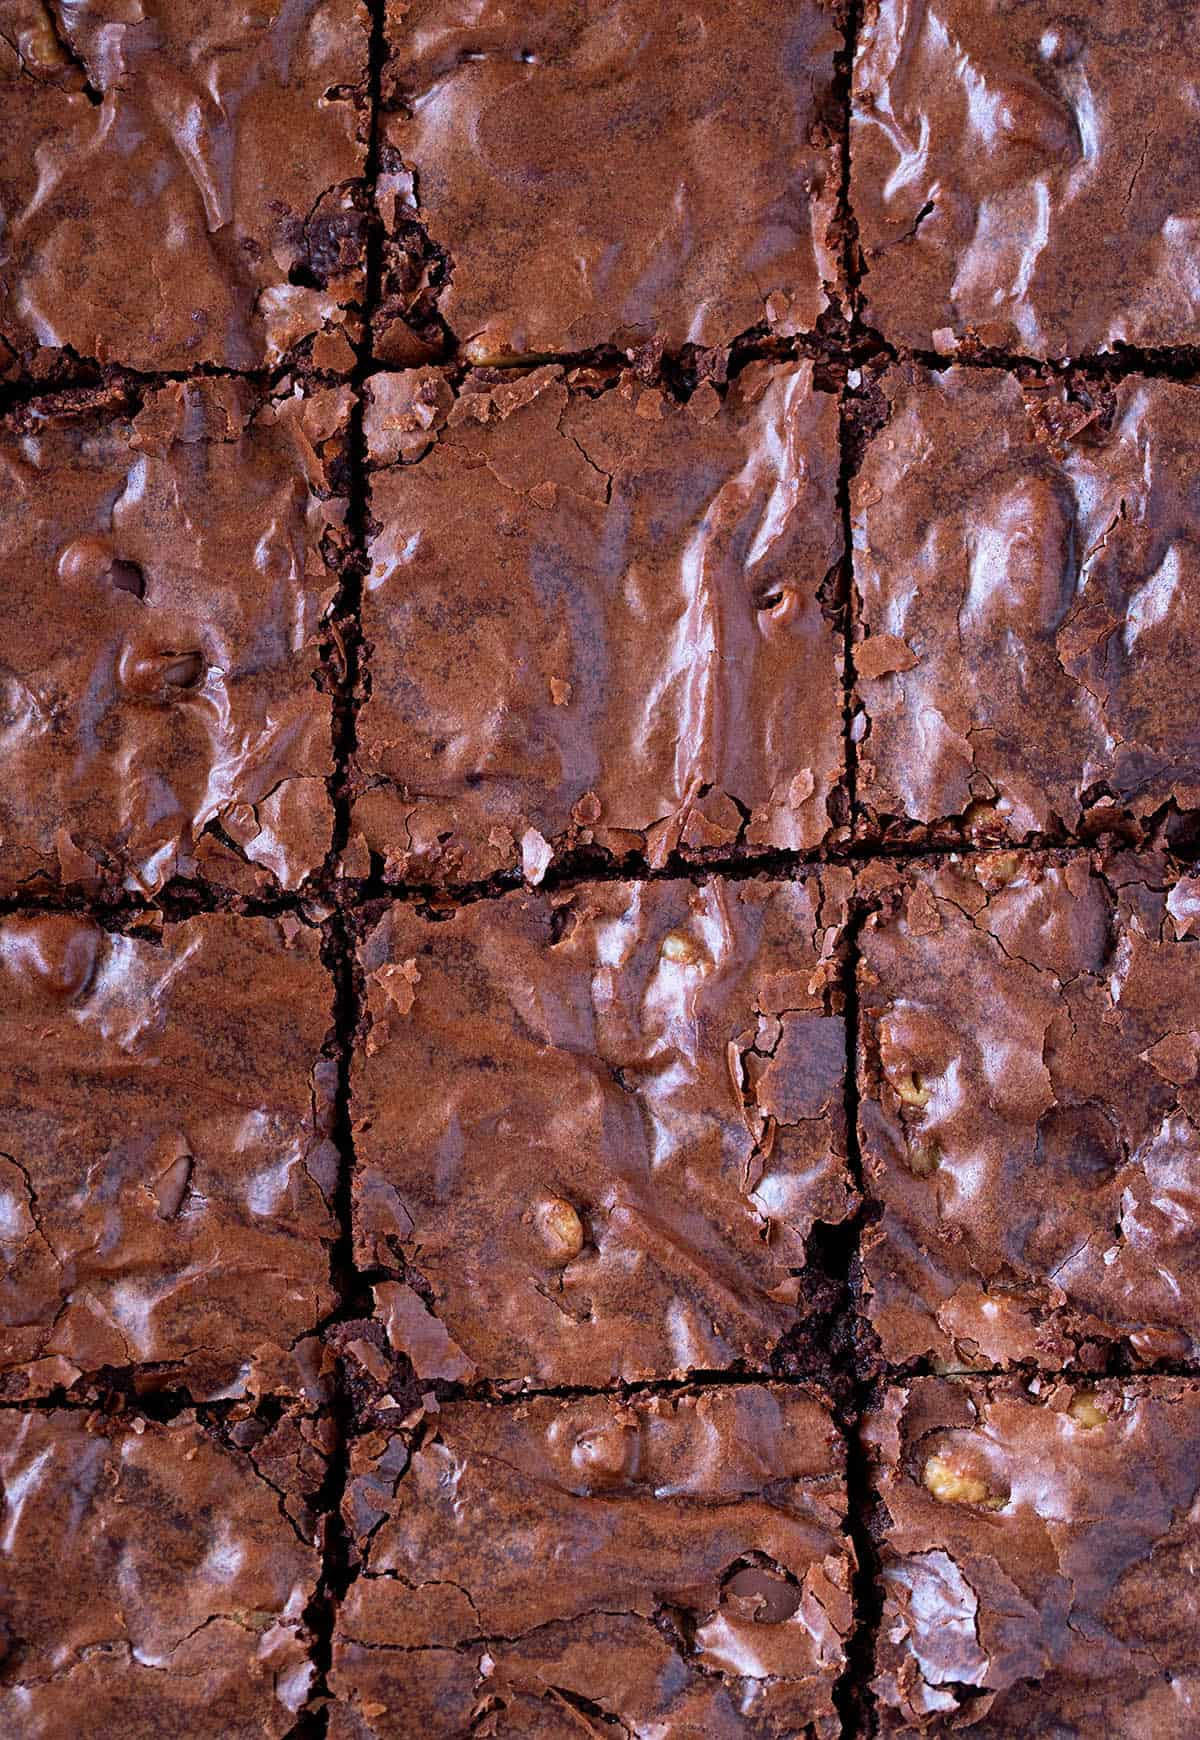 Close up of a pan of Homemade Brownies with a crinkly top